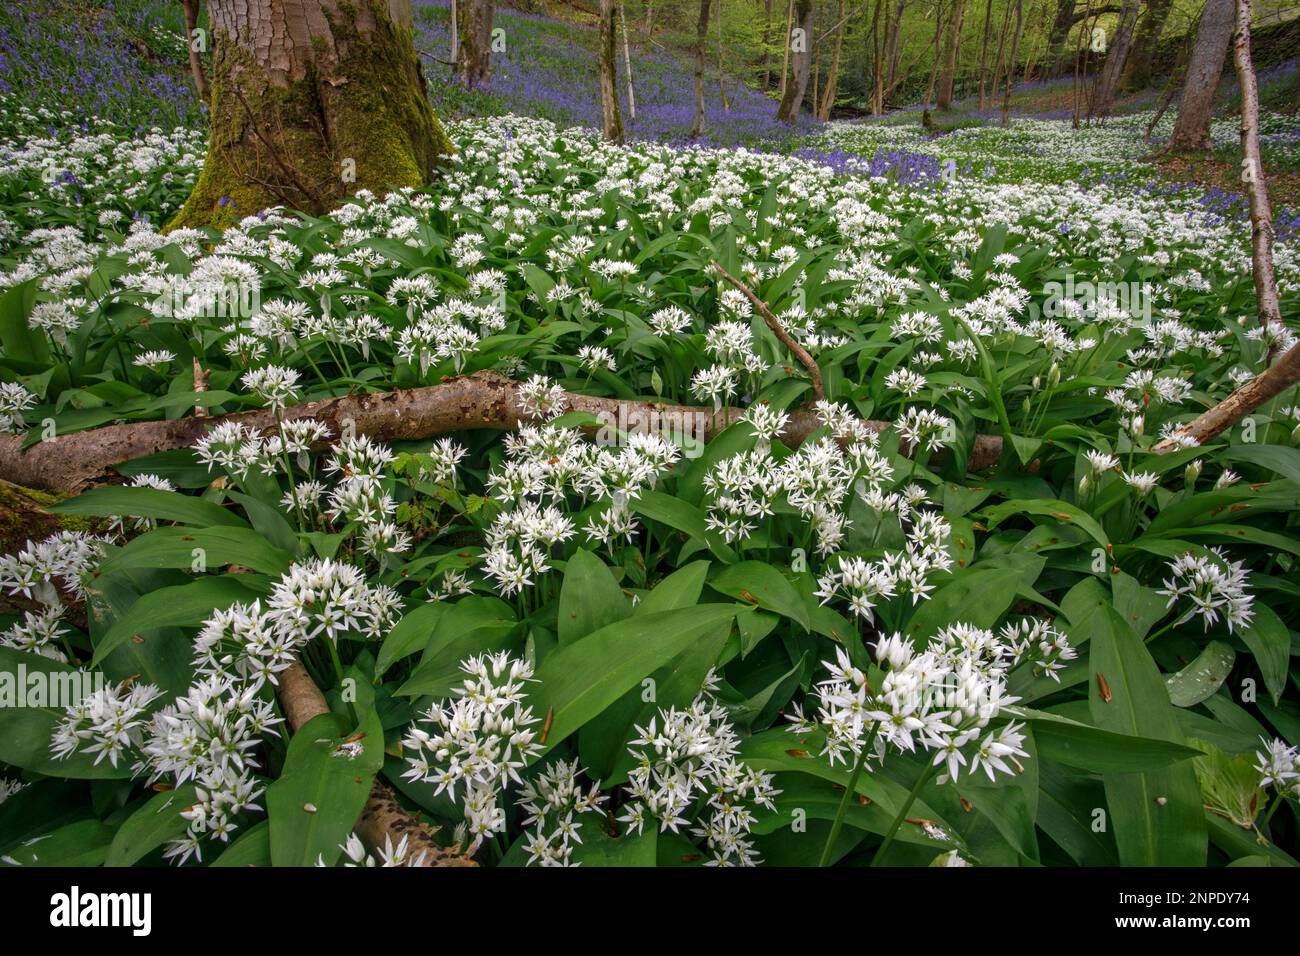 Wild garlic and bluebells growing in woodland in Wharfedale in the Yorkshire Dales. Stock Photo